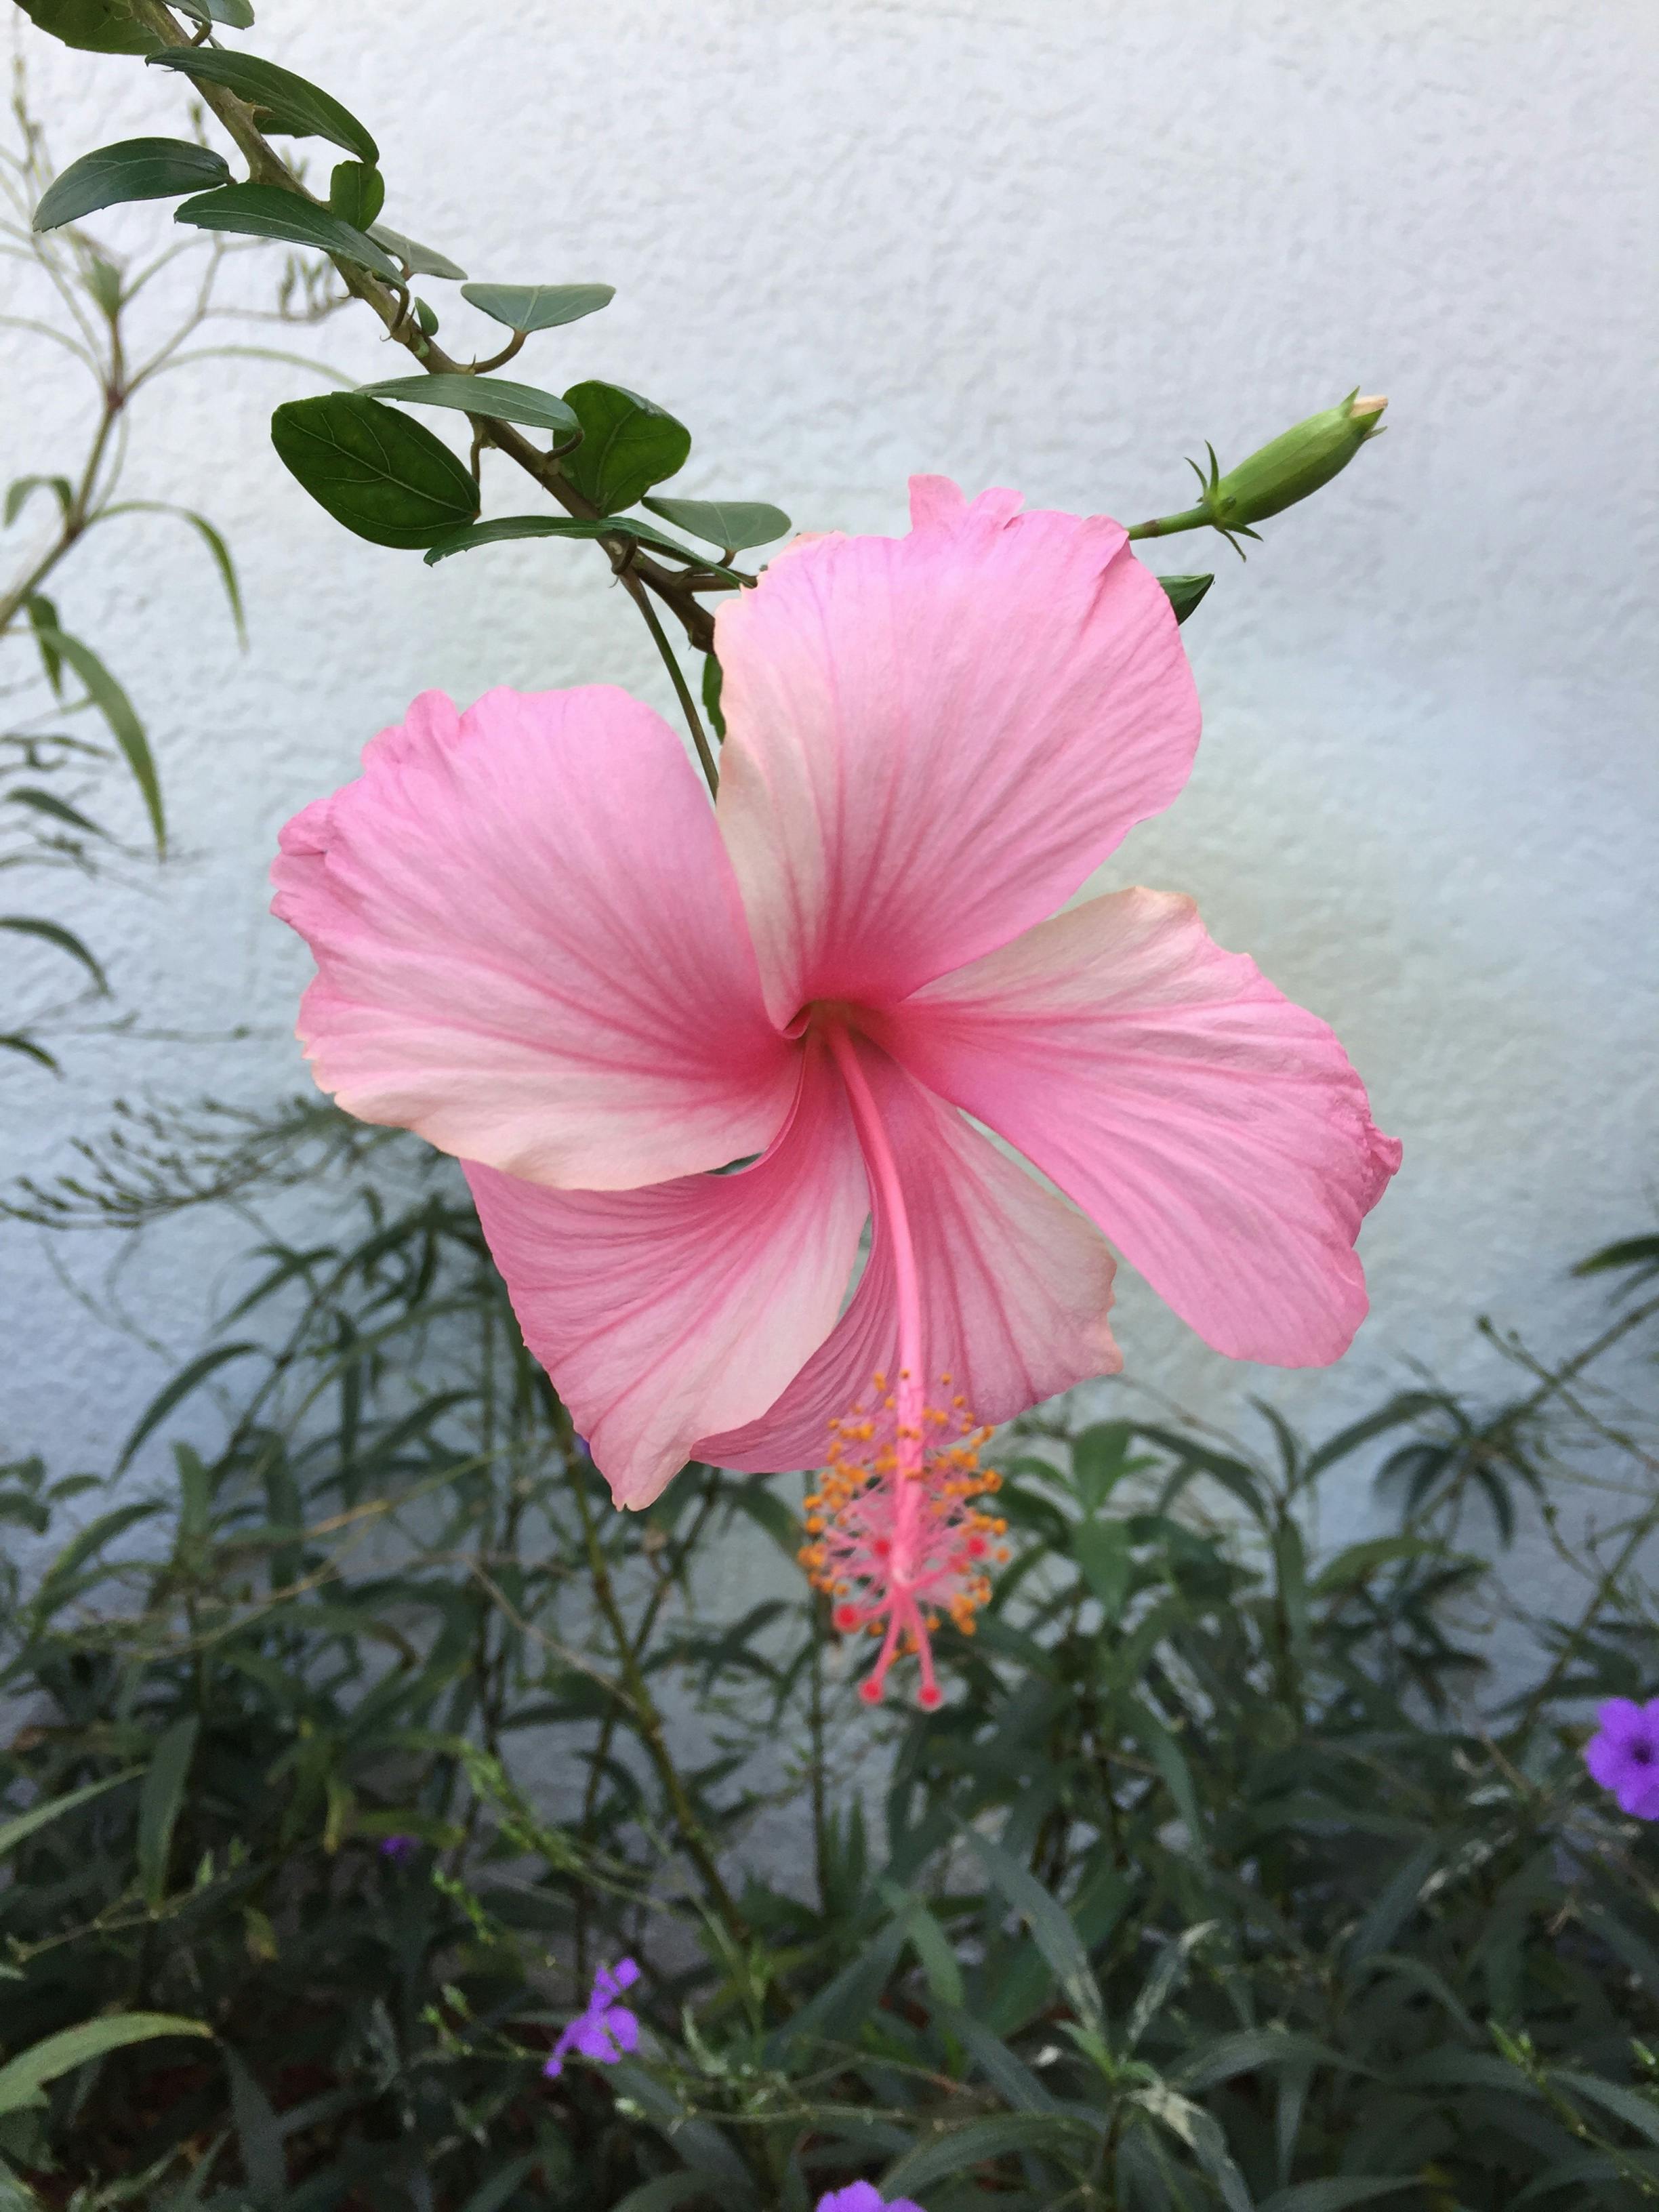 Free stock photo of Florida flowers, Hibiscus, pink color